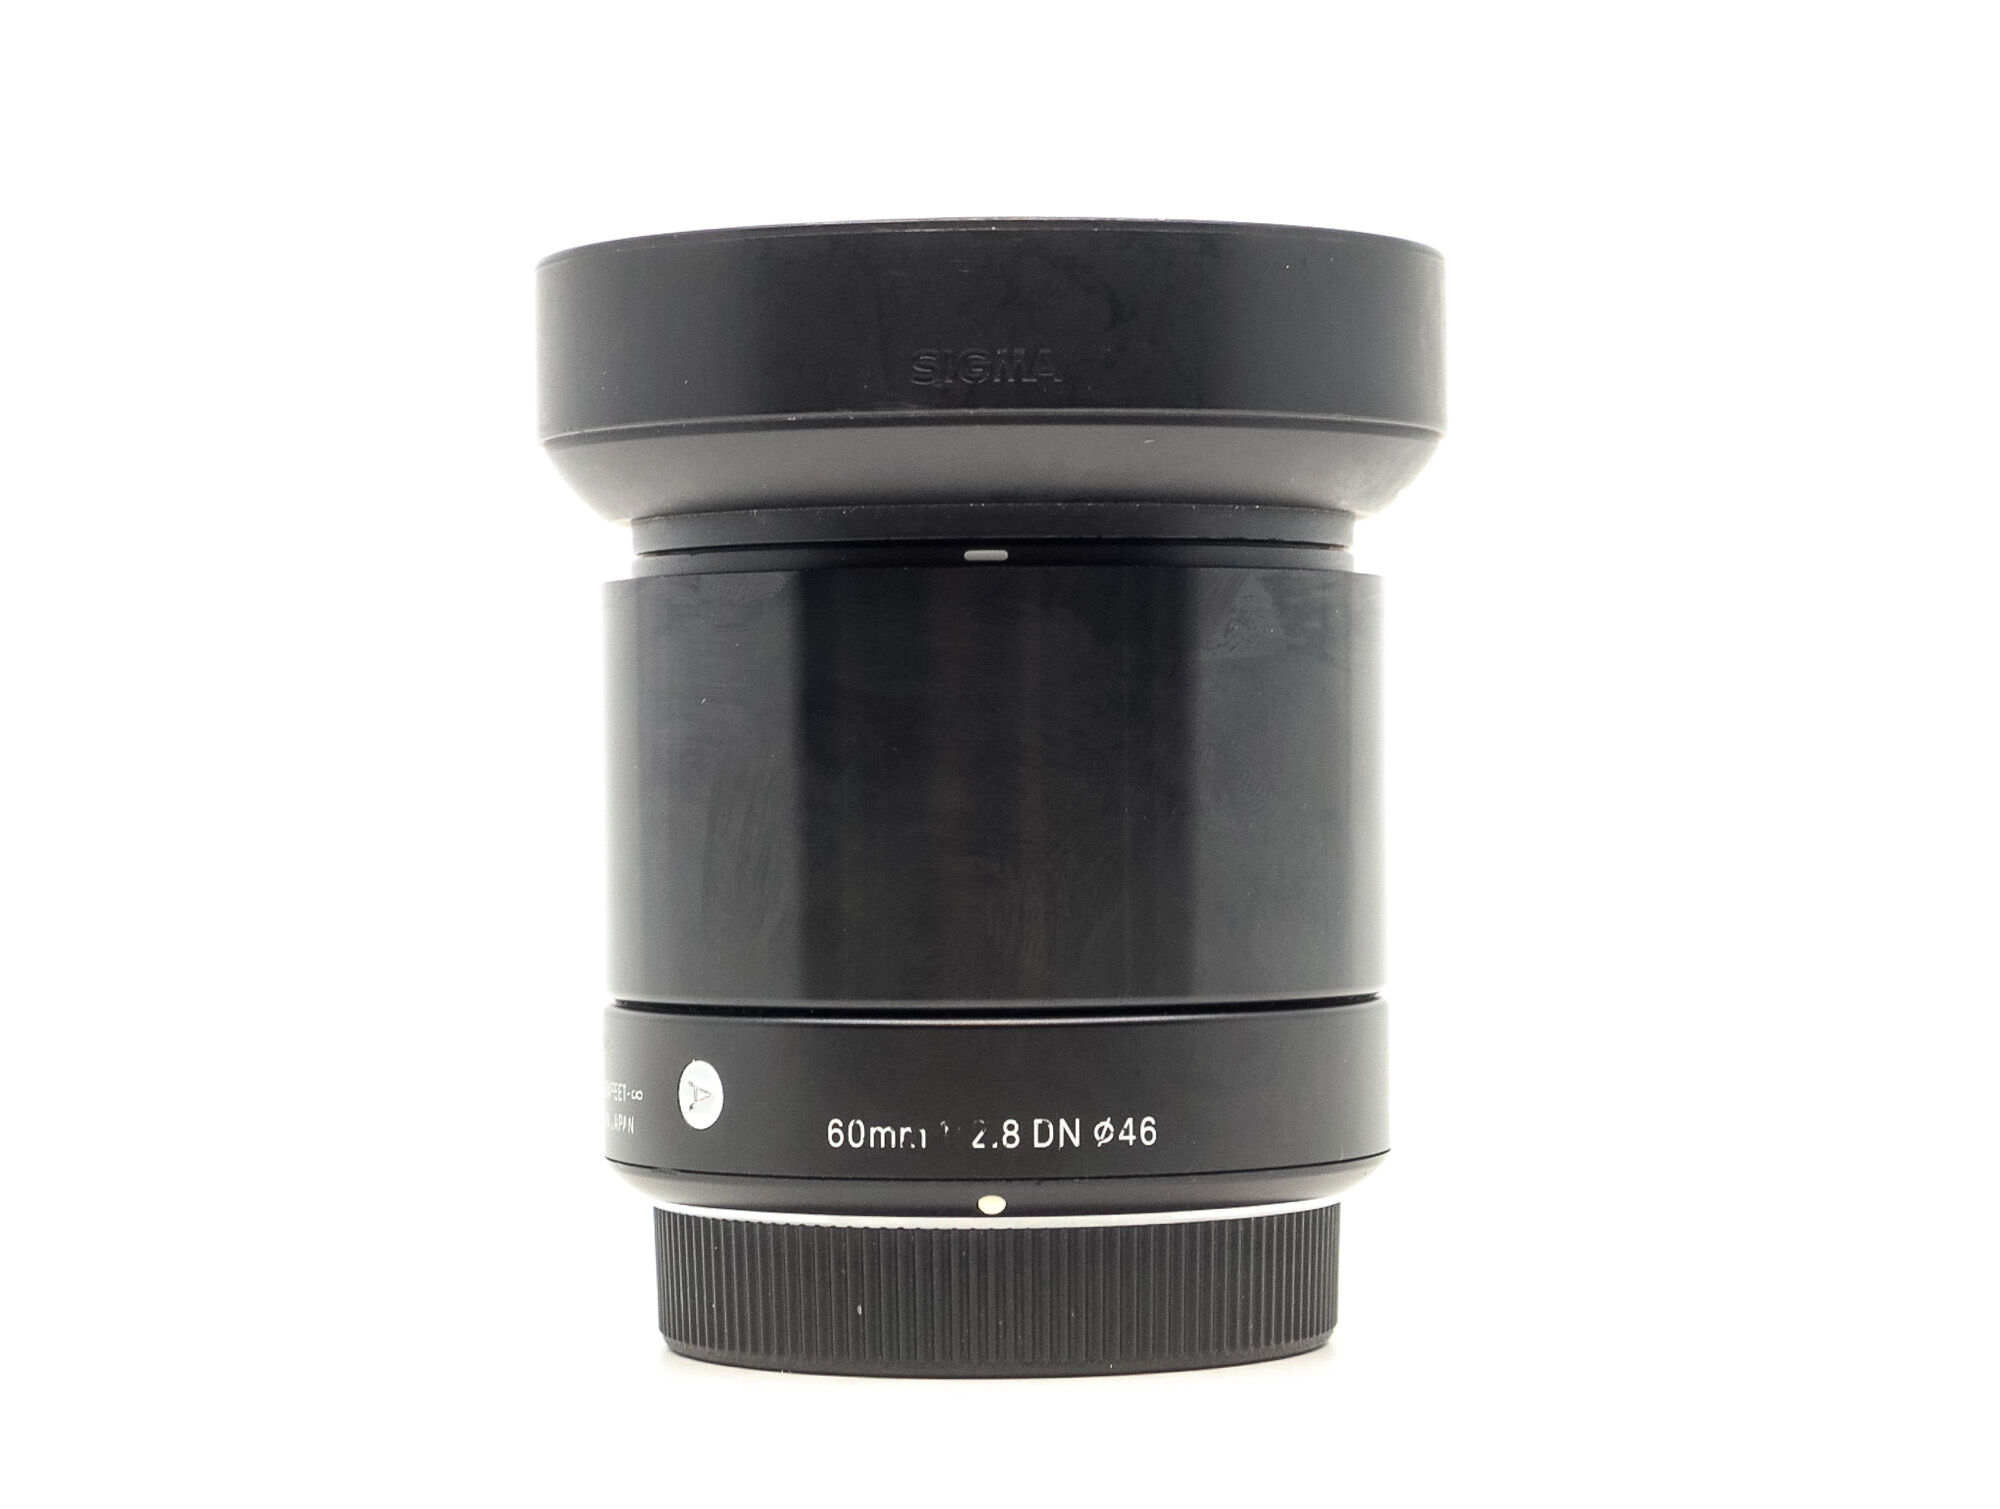 sigma 60mm f/2.8 dn art micro four thirds fit (condition: good)